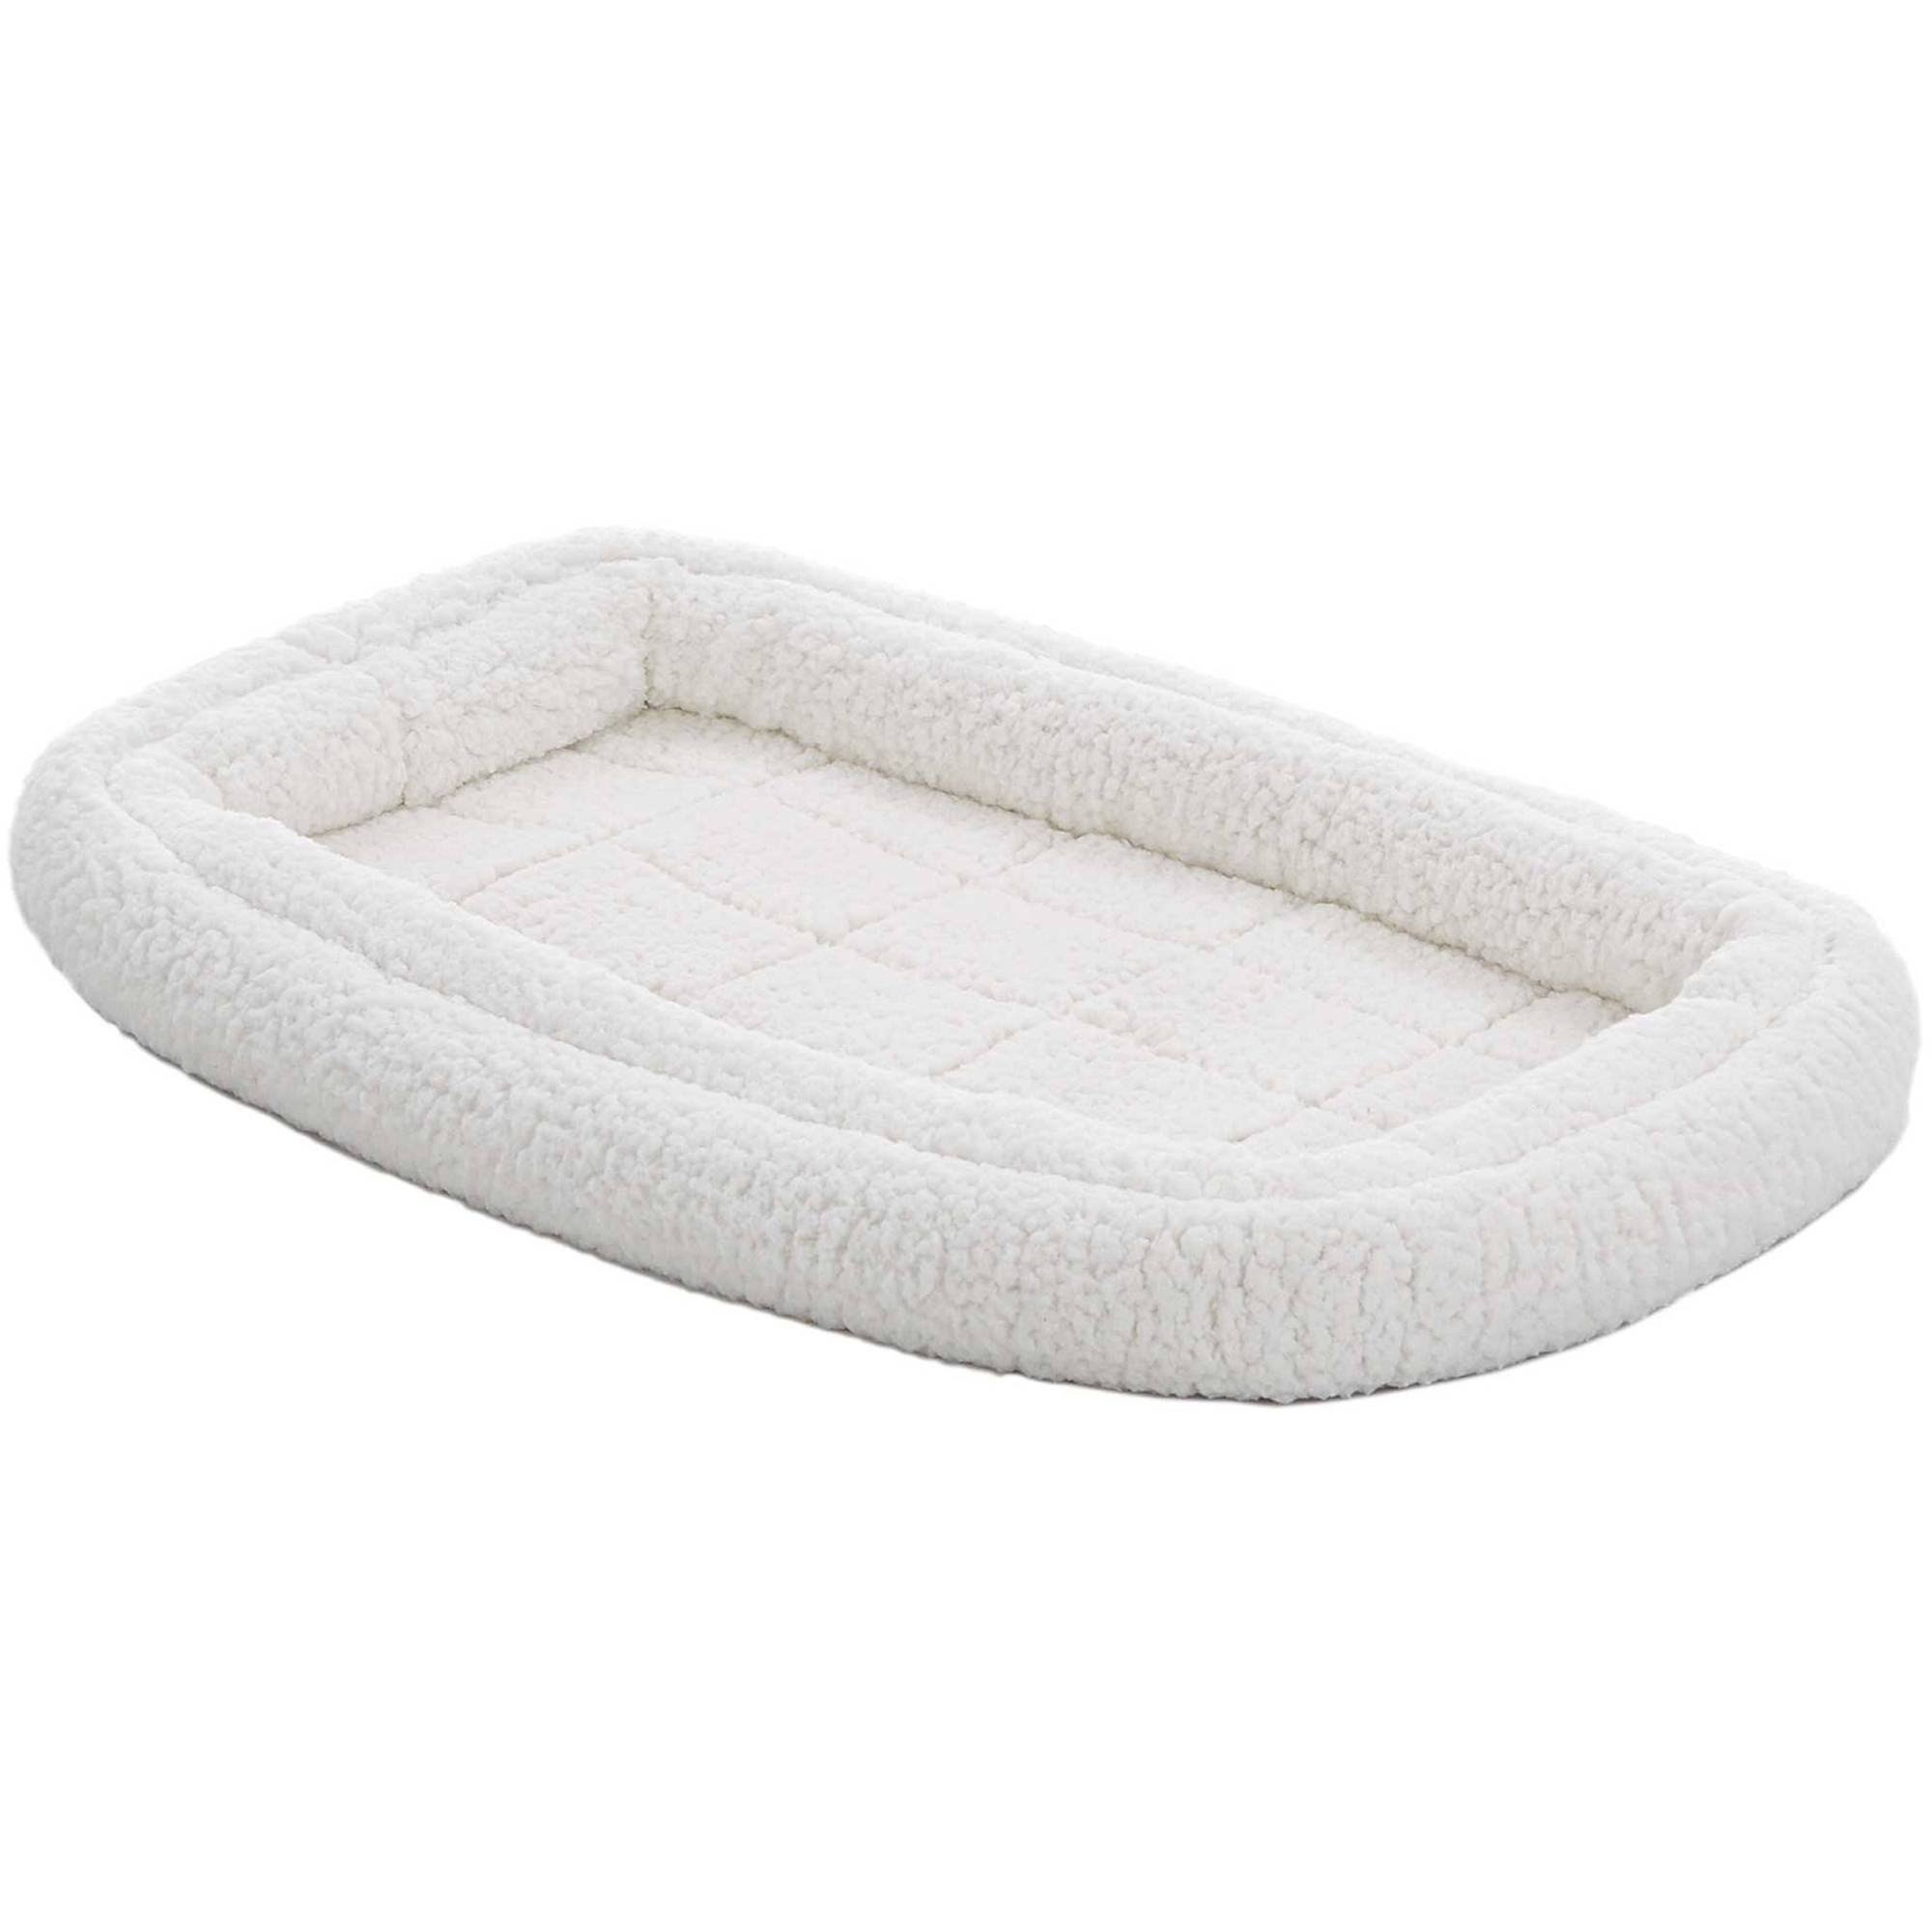 Midwest QuietTime Double Bolster Bed - 24"